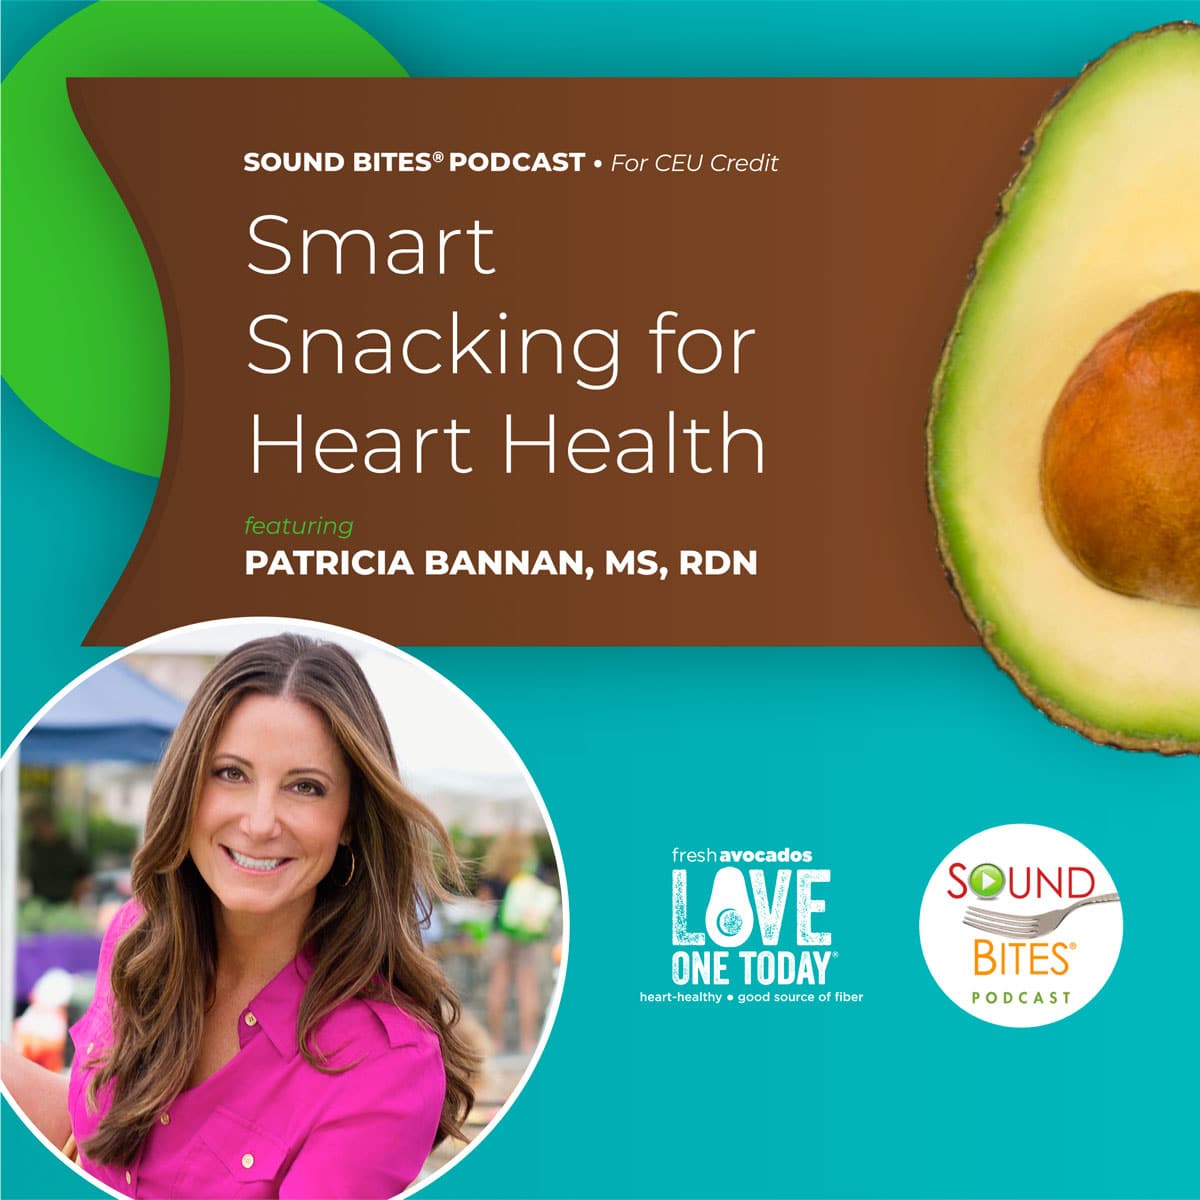 Podcast Episode 191: Smart Snacking for Heart Health - Patricia Bannan, MS, RDN